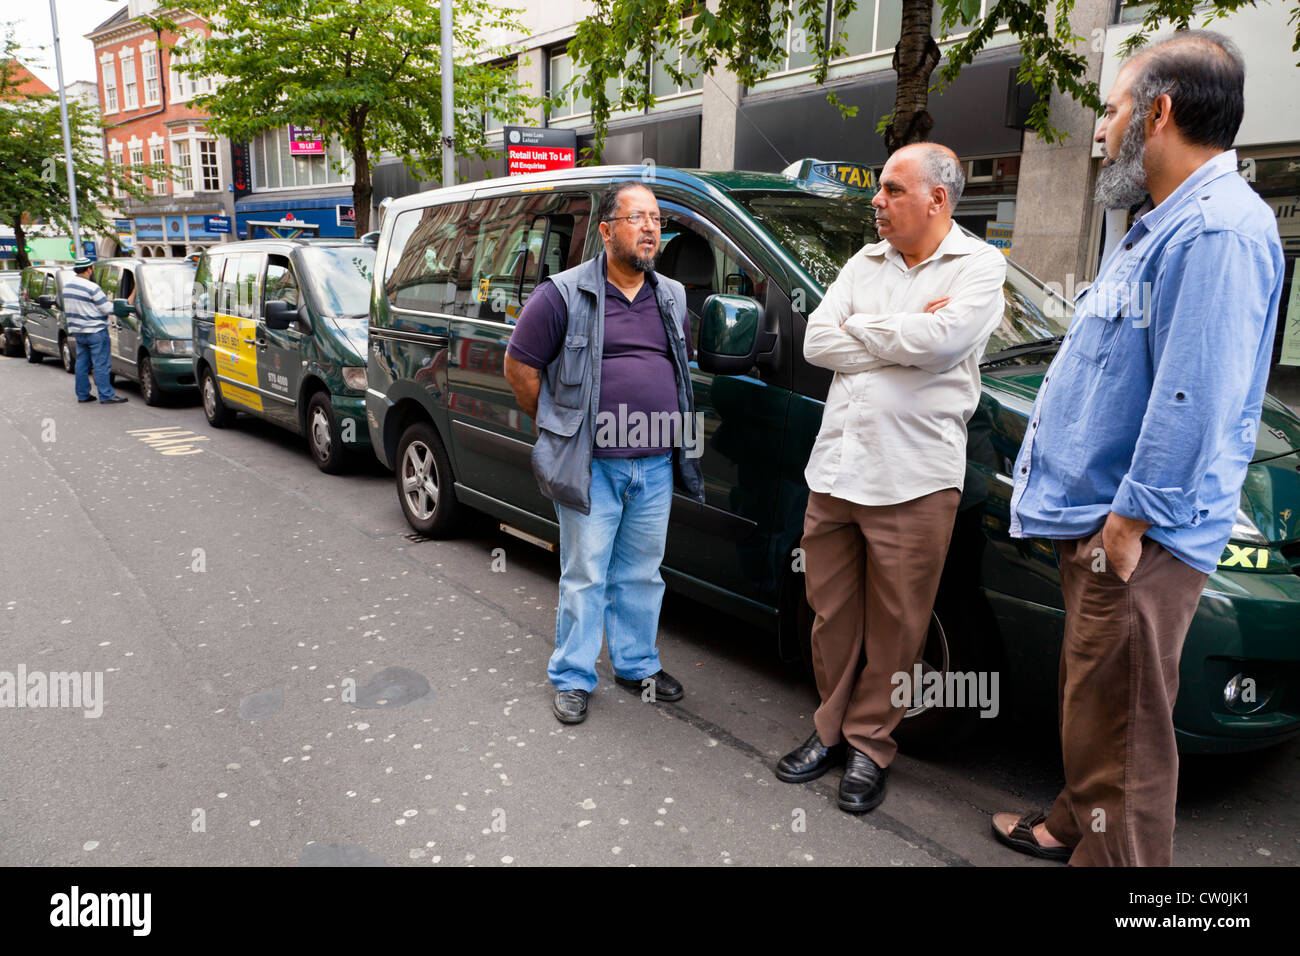 Taxi rank. Taxi drivers waiting for a fare next to their taxis, Nottingham city centre, England, UK Stock Photo